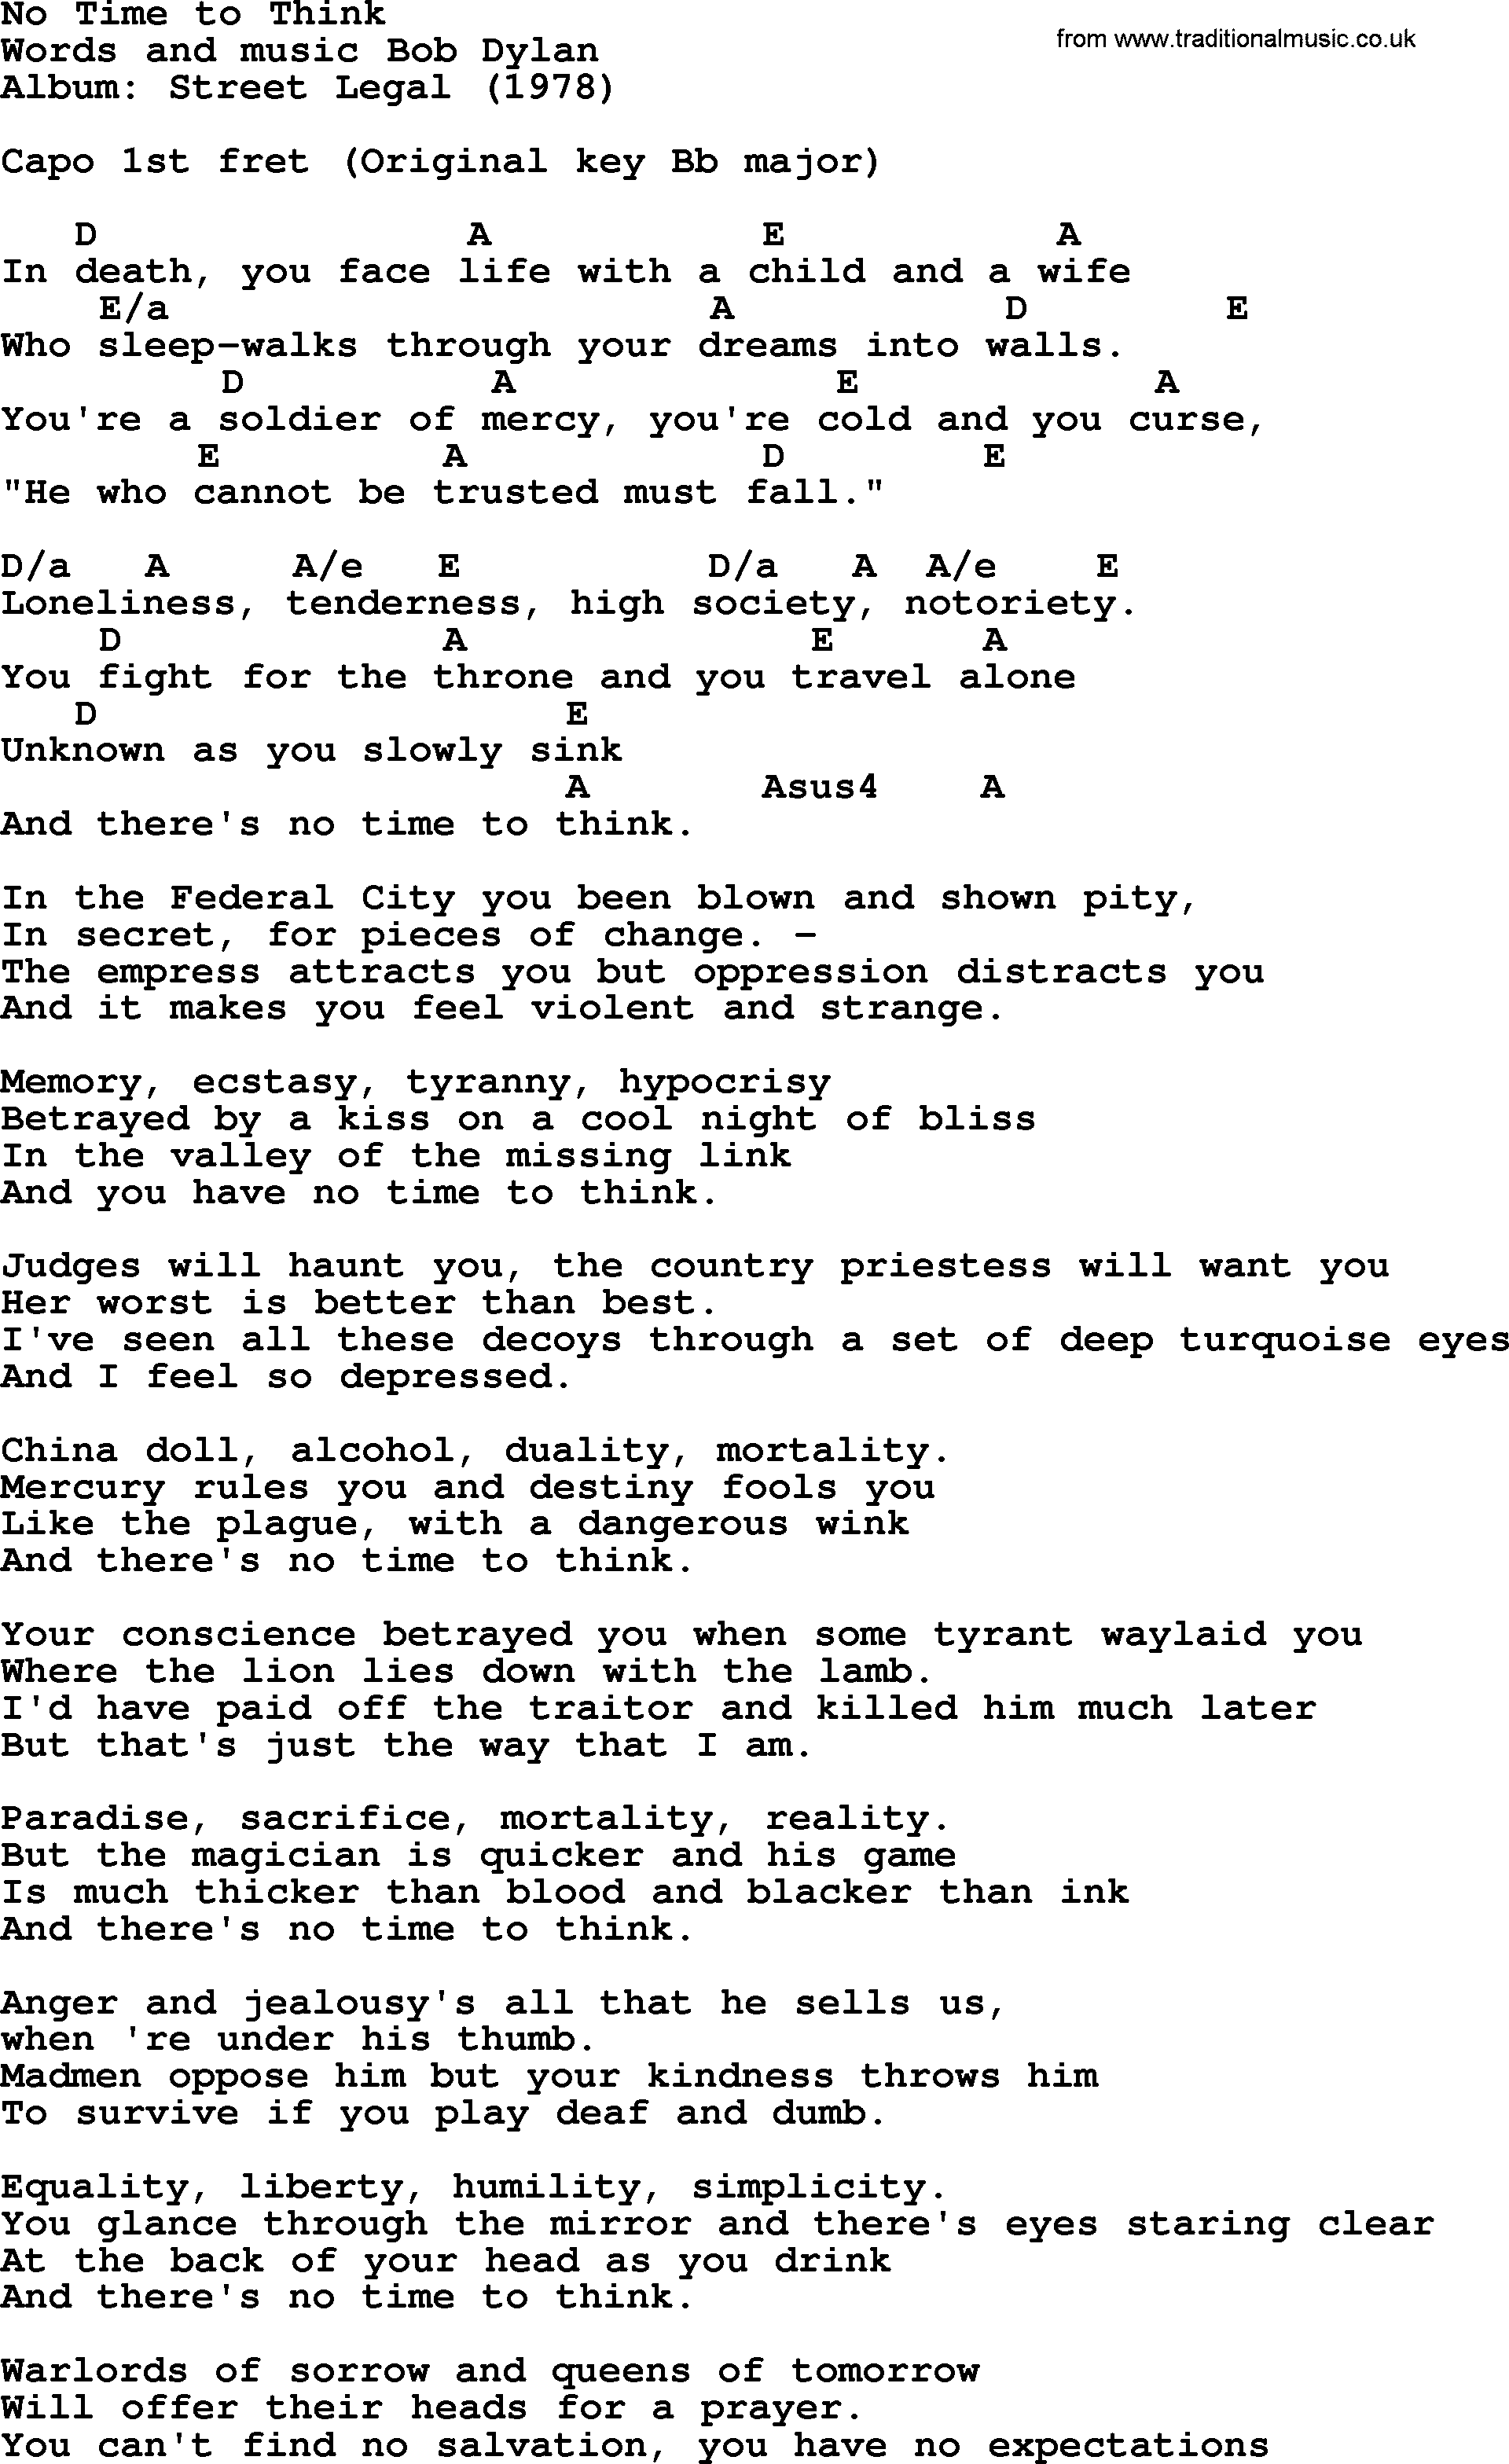 Bob Dylan song, lyrics with chords - No Time to Think